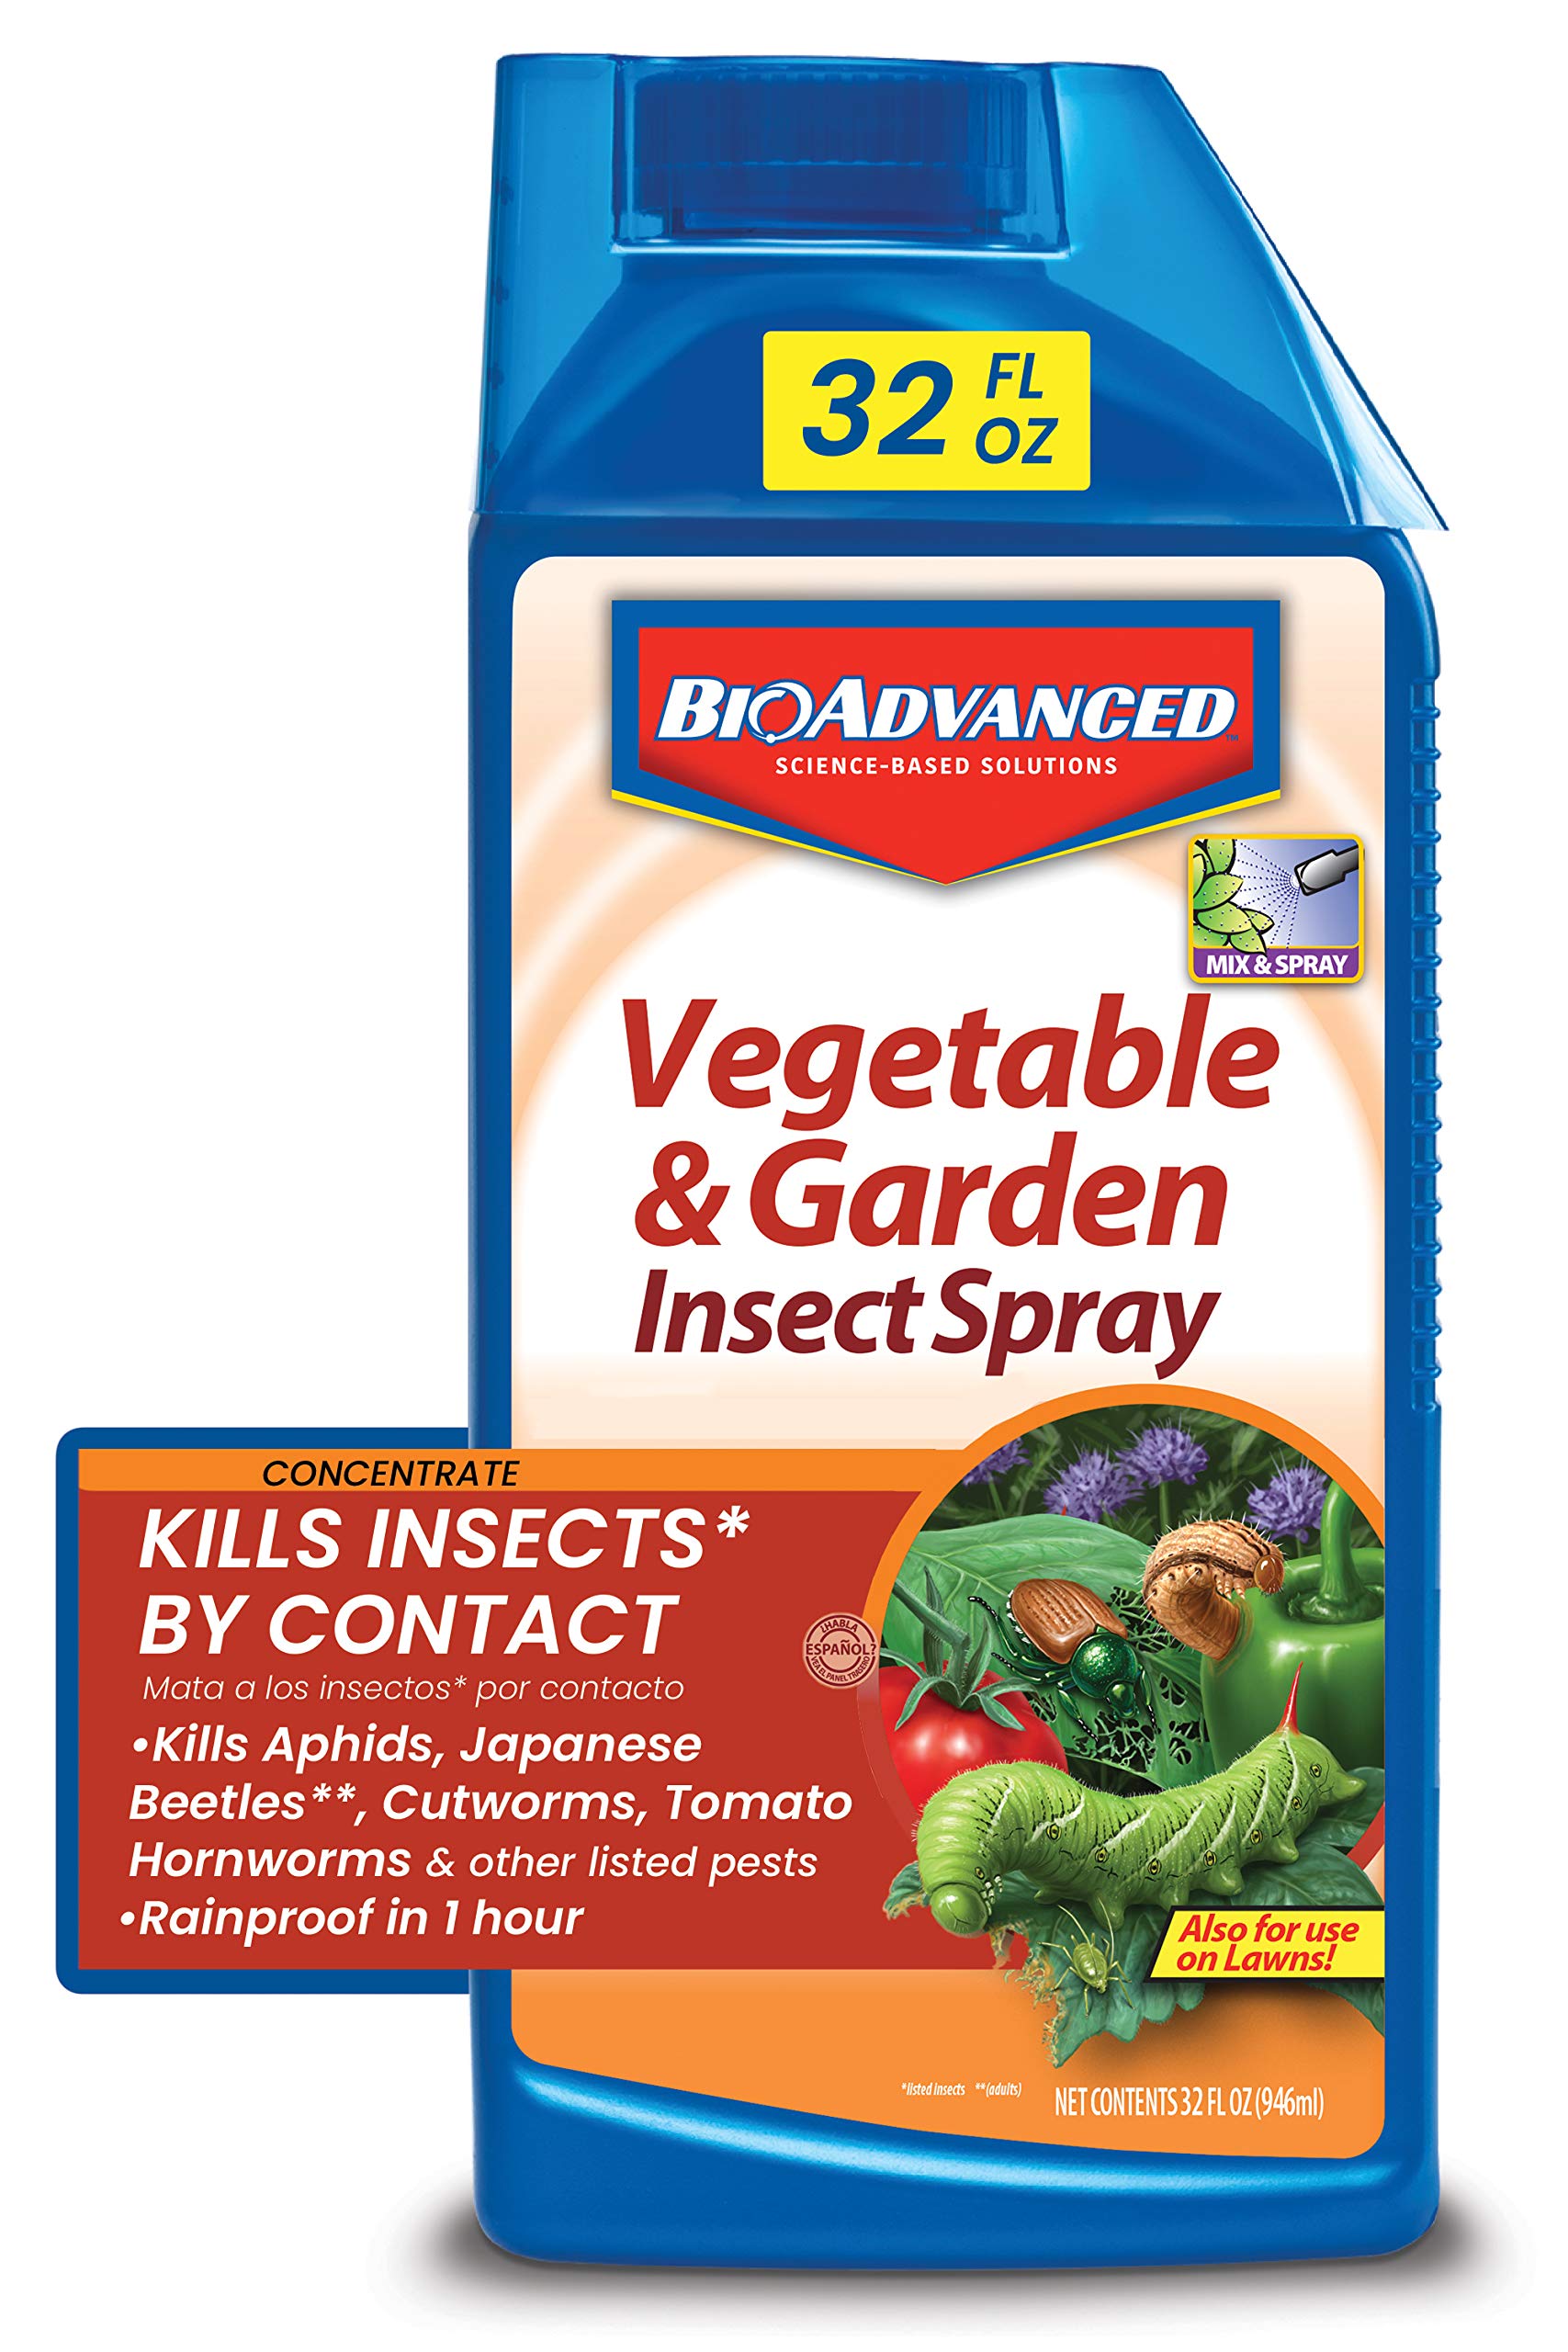 BioAdvanced Vegetable and Garden Insect Spray